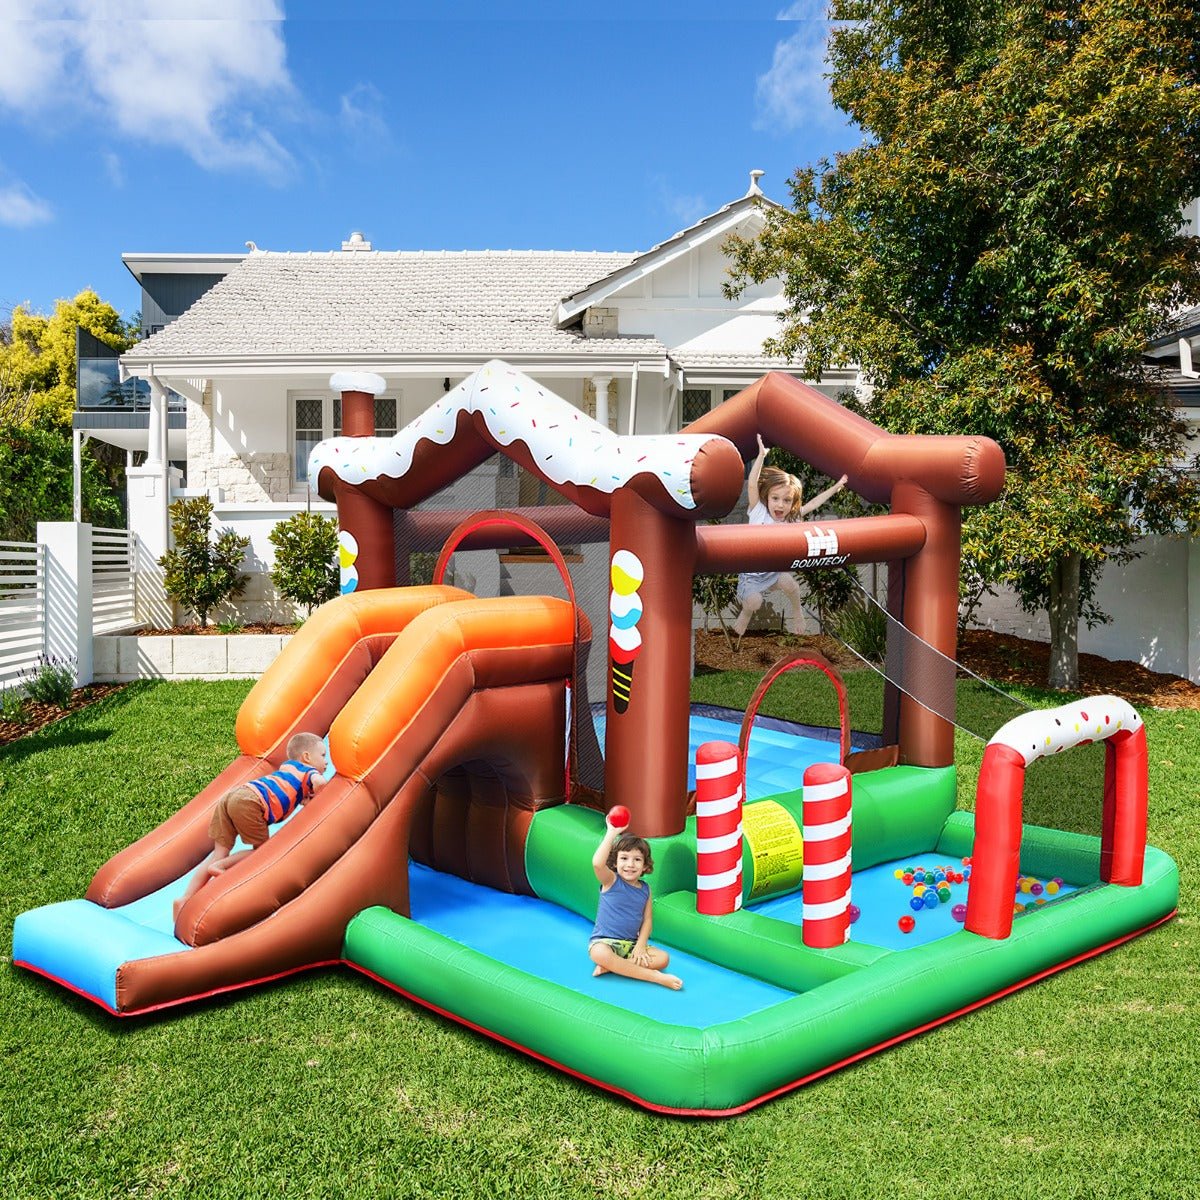 Kids Inflatable Bounce Castle - Slide Park for All-Day Entertainment (Blower Included)